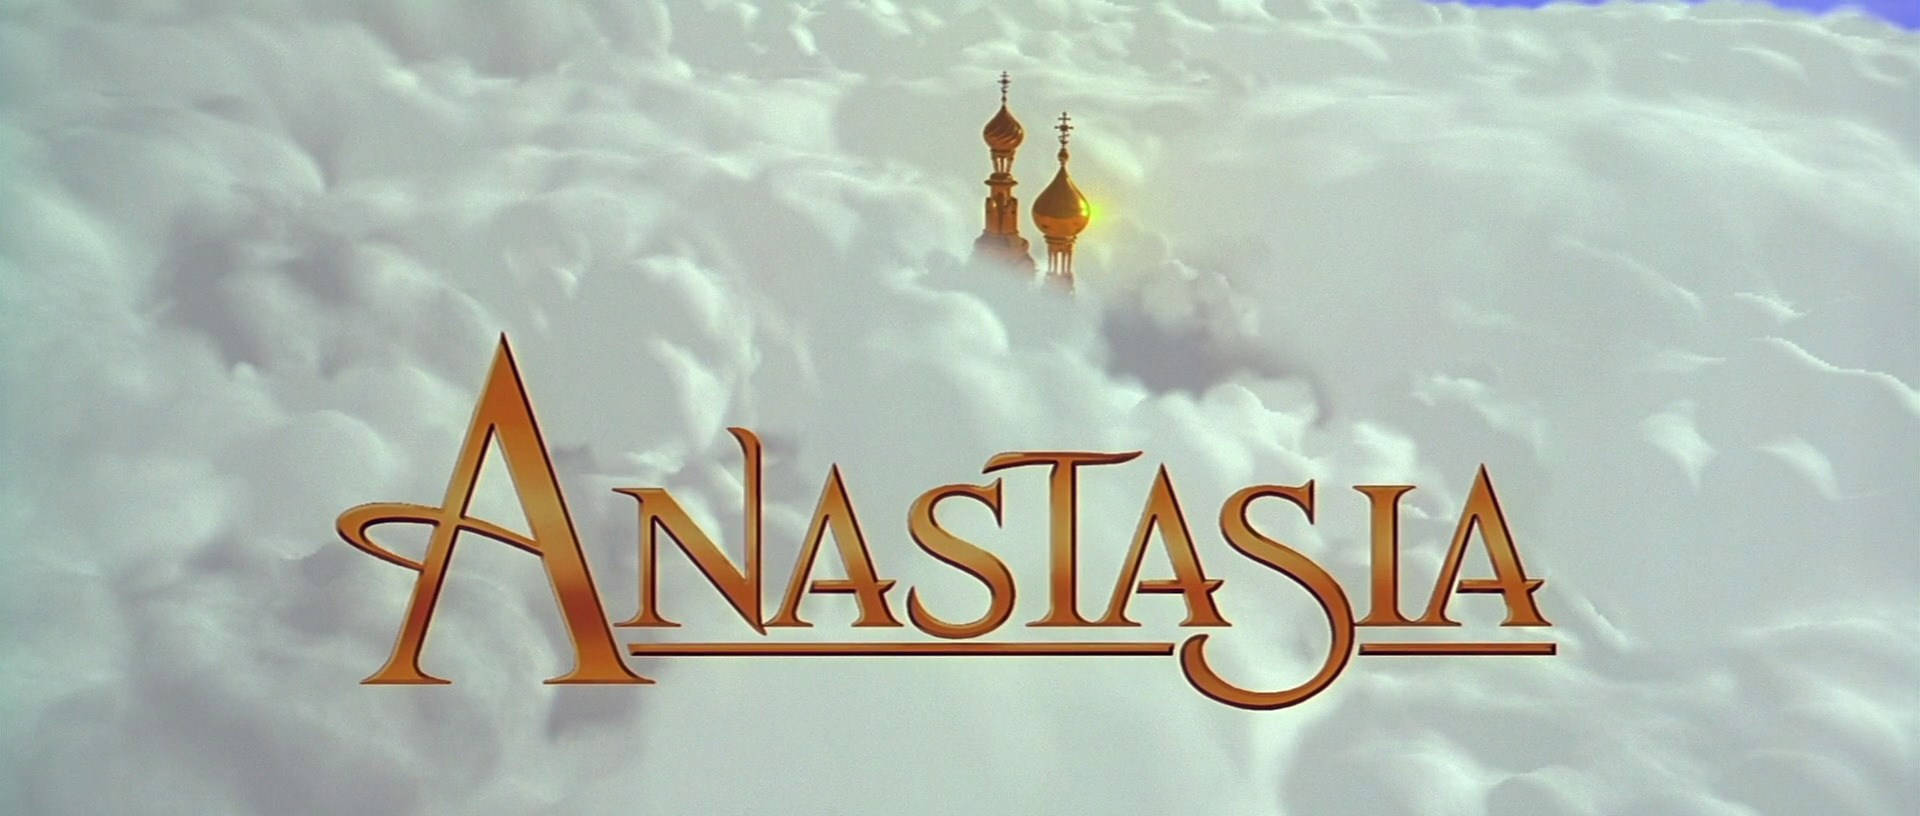 Anastasia Title Clouds Background